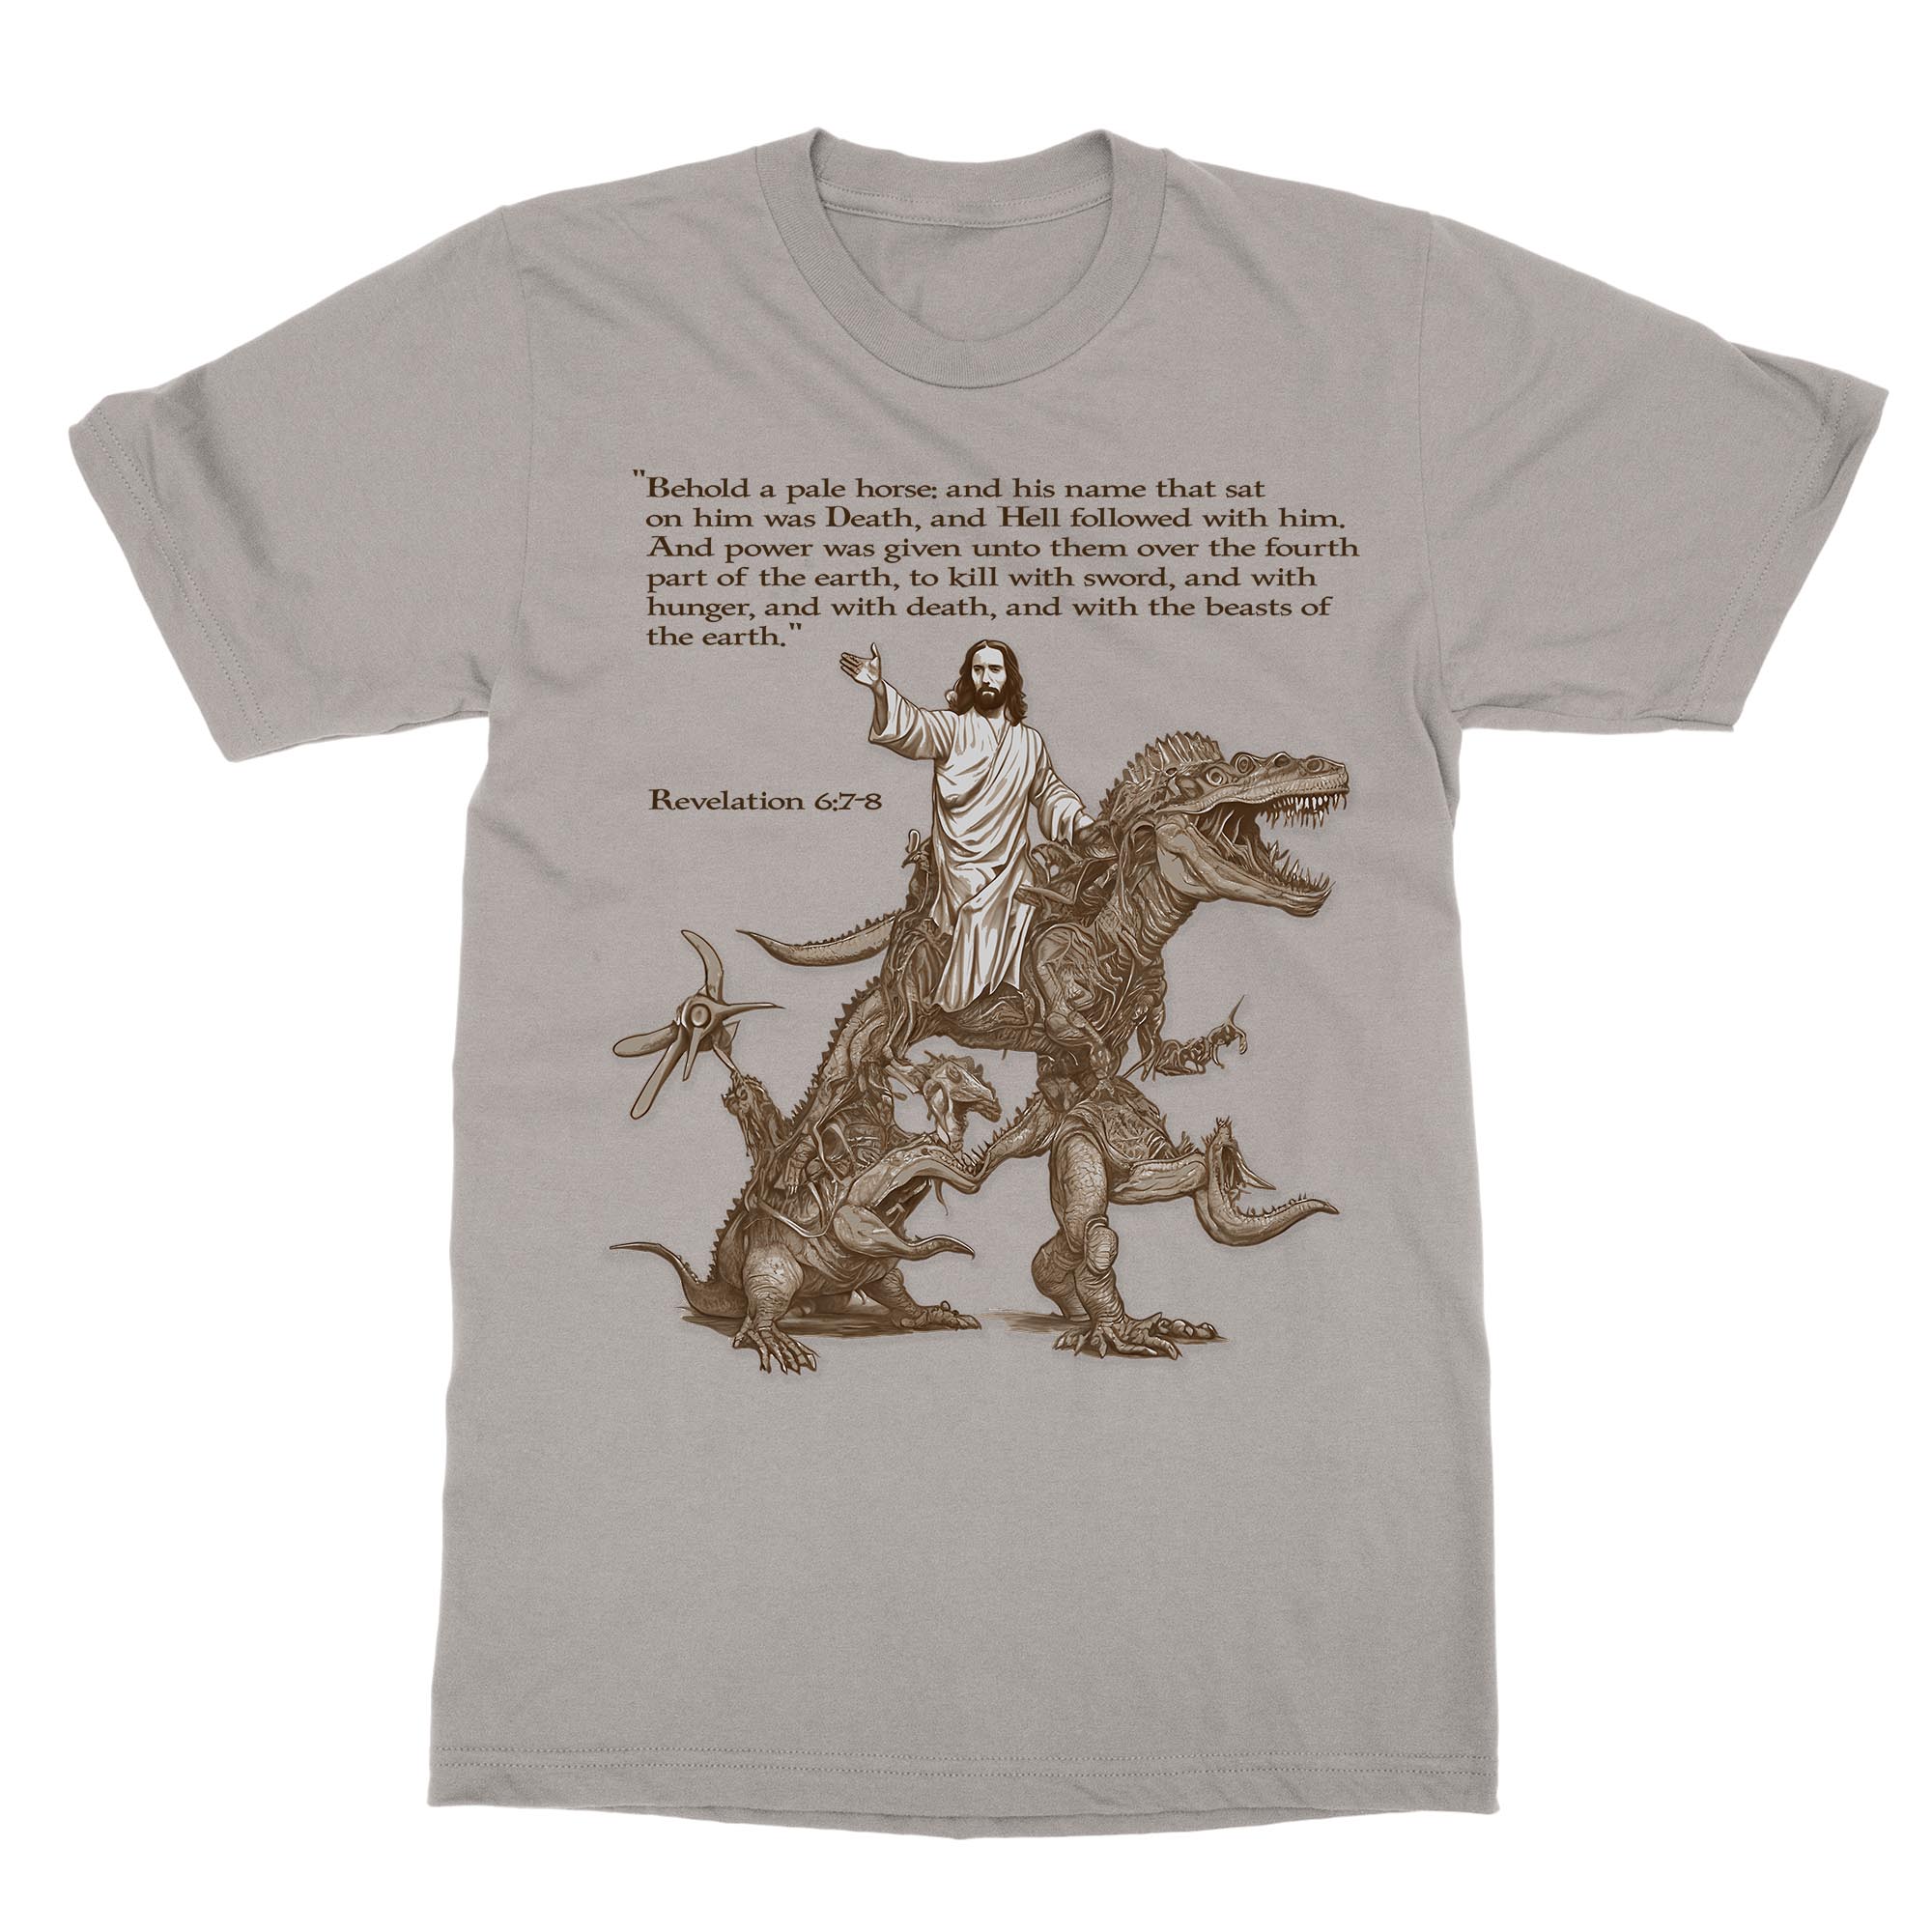 T-Shirts XS / Heather Stone Armageddon: Wrathful Jesus Returns with His Alien Army, The Second Coming, Apocalypse Graphic Art T-Shirt